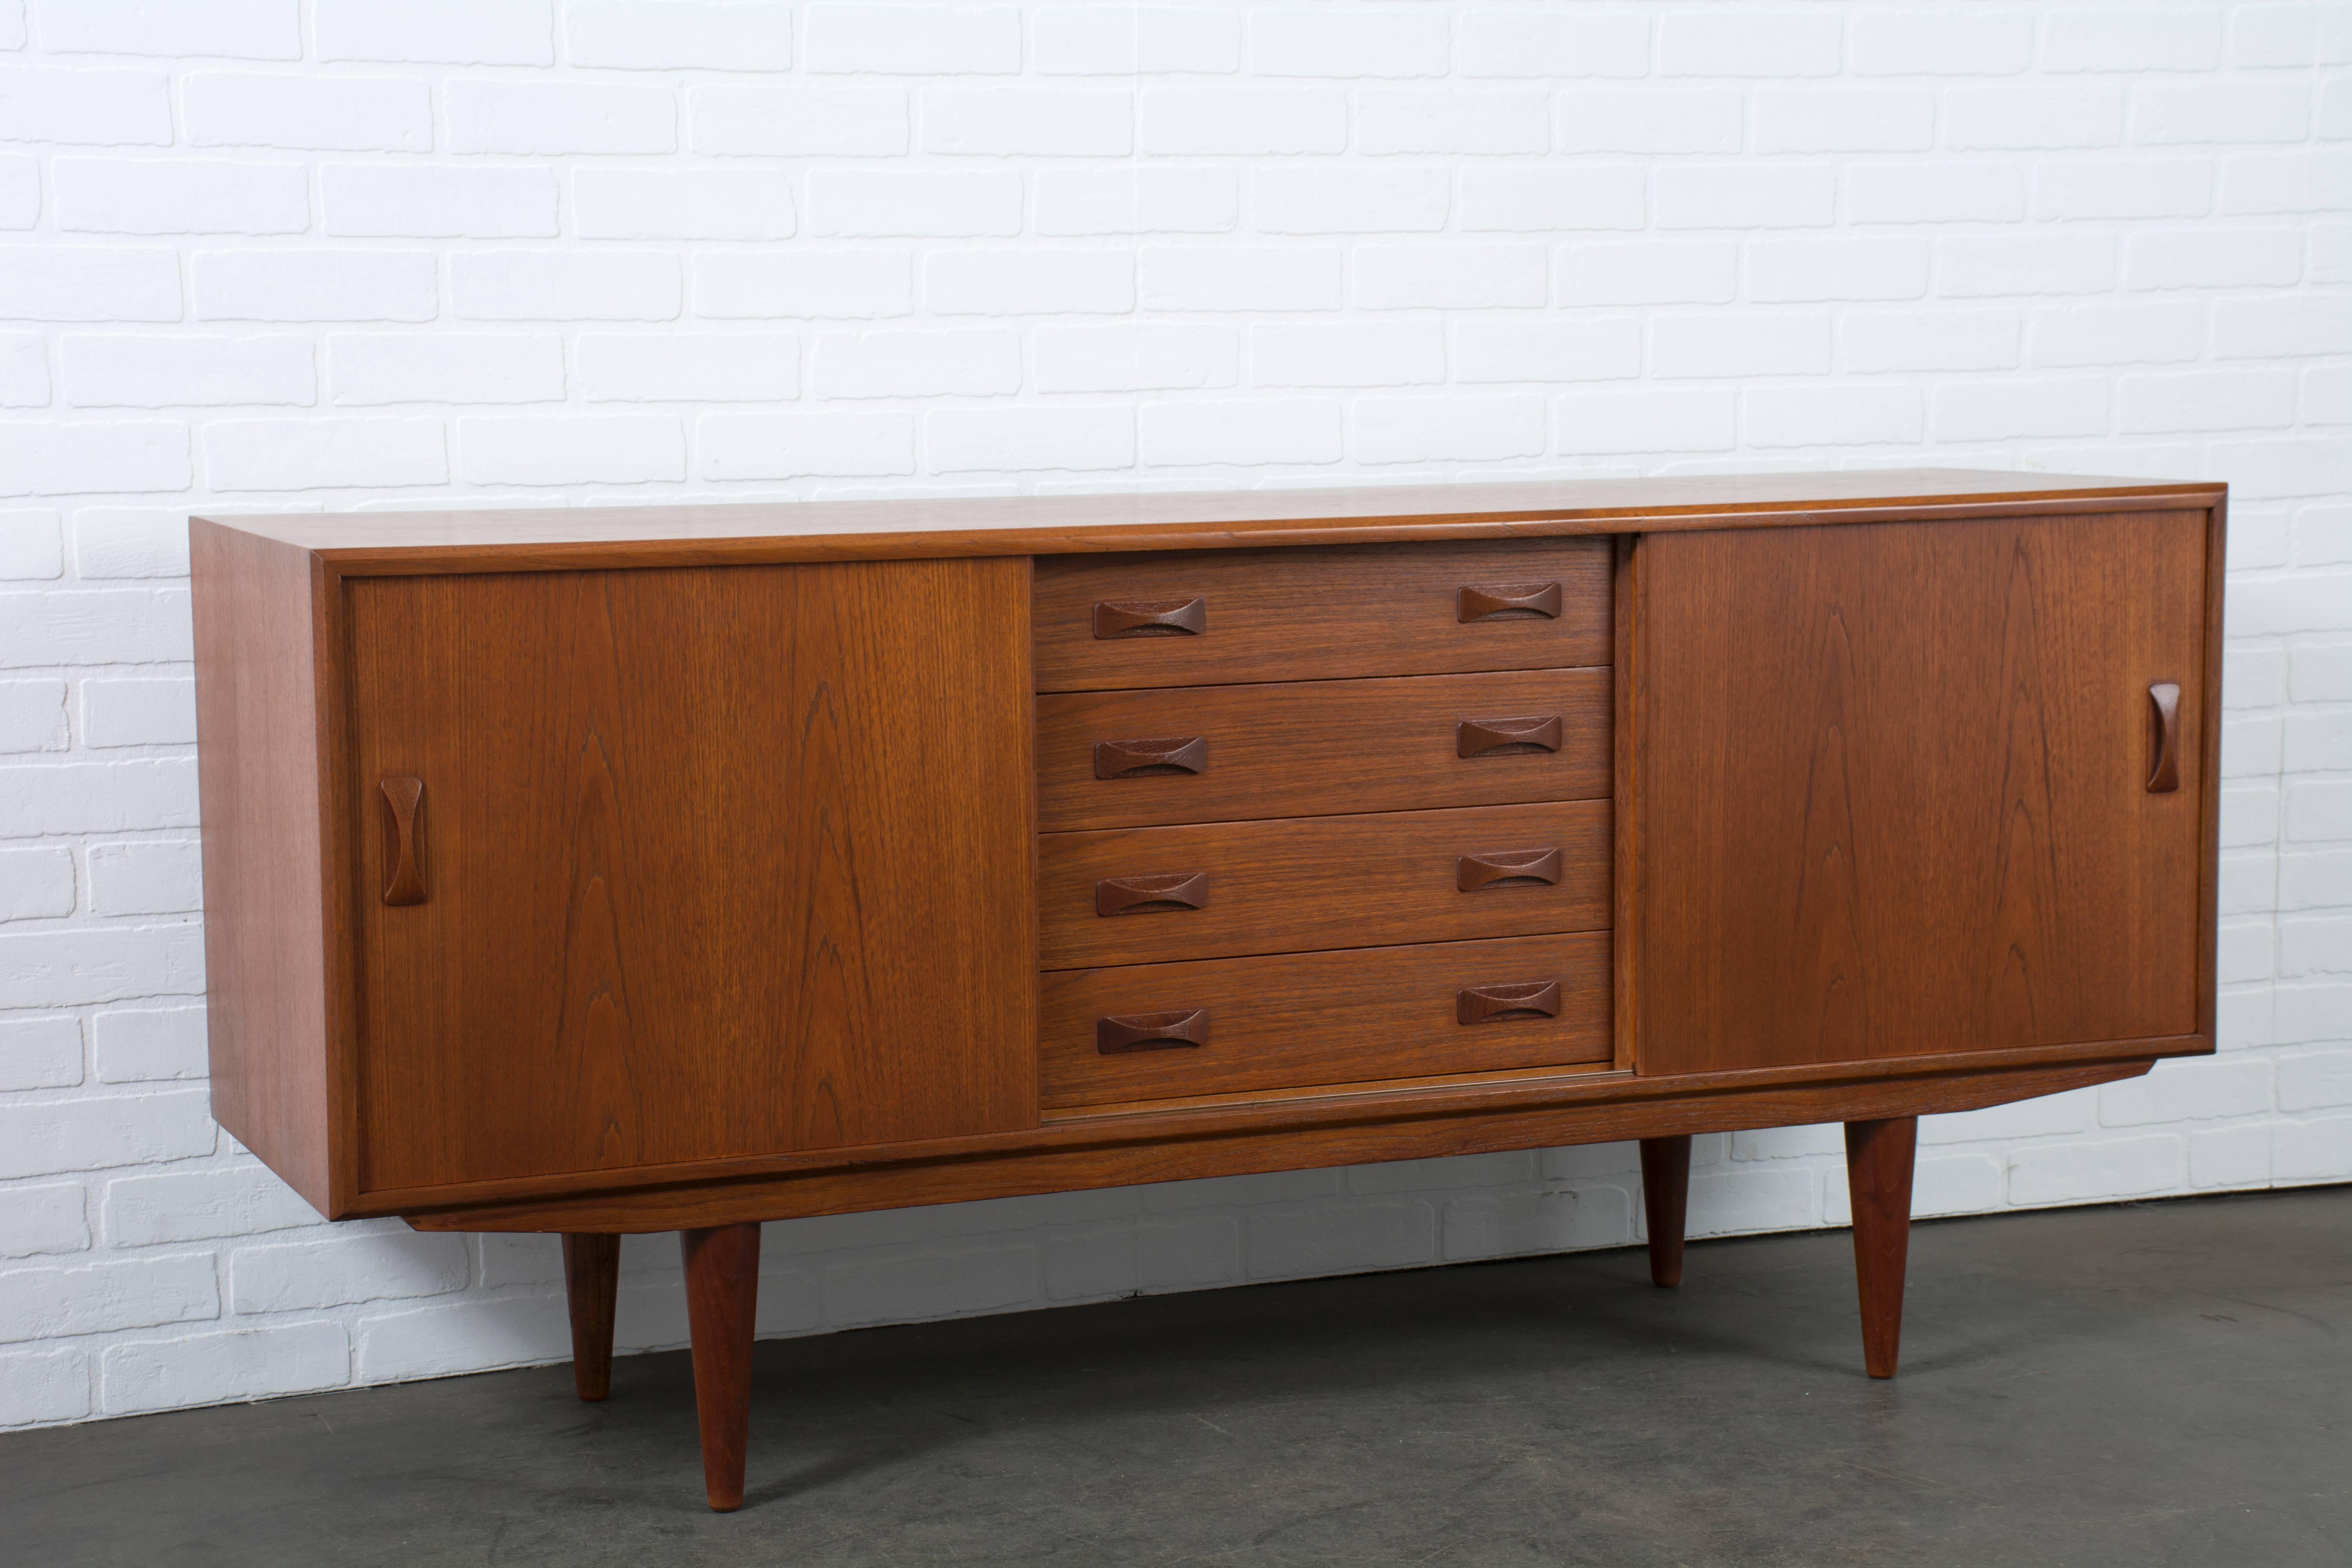 This Danish modern teak credenza was manufactured by Clausen & Son in the 1960s, Denmark. It features four drawers in the middle and sliding doors on each side that conceal one adjustable shelf.